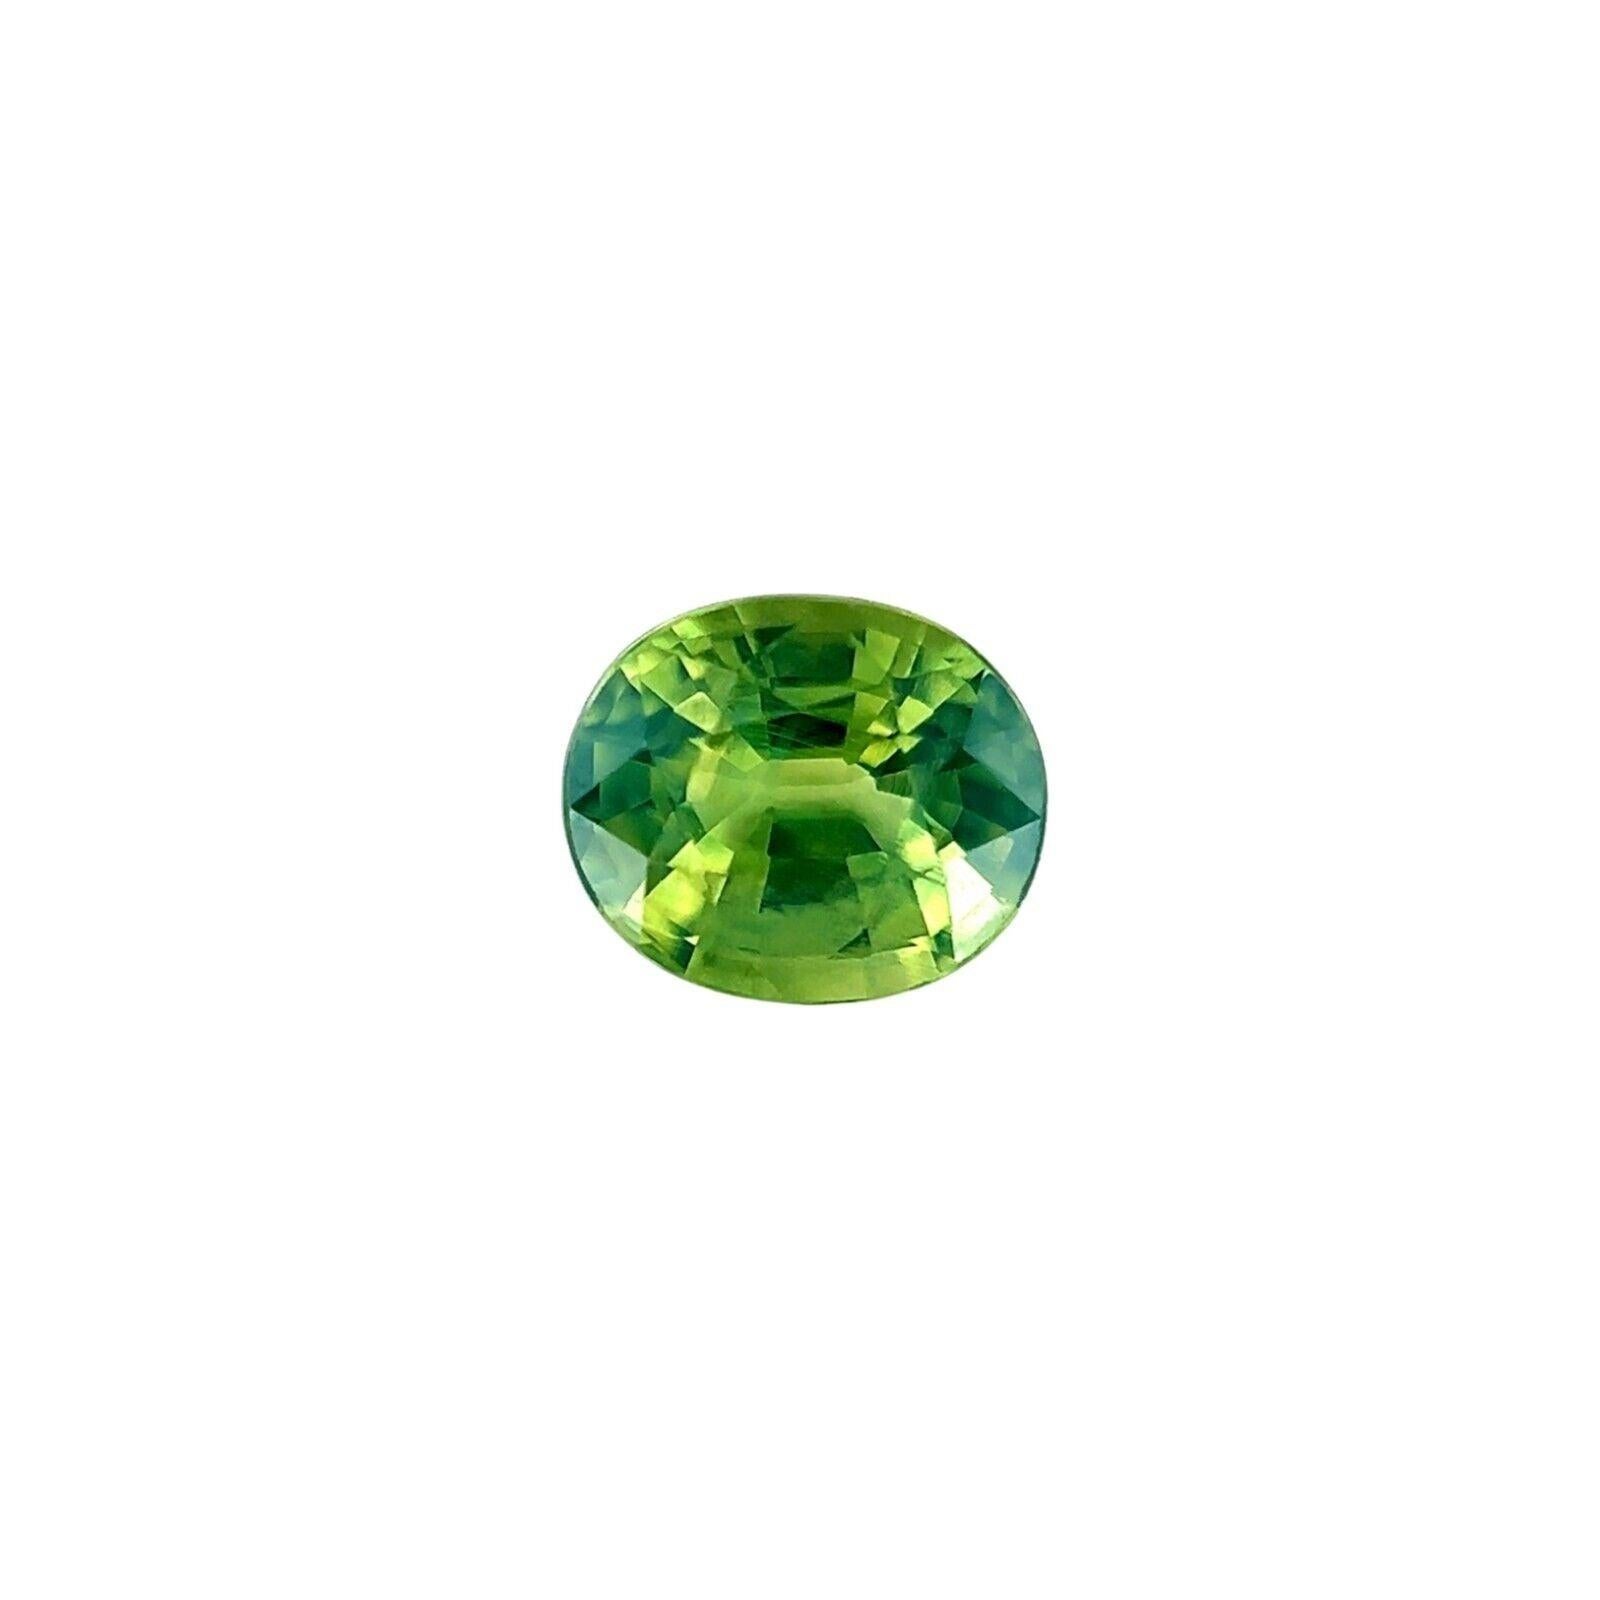 GIA Certified Vivid Yellow Green Sapphire 0.90Ct Natural Oval Cut Unheated Rare 

Fine Untreated Vivid Yellow Green Untreated Sapphire Gemstone.
0.90 Carat unheated sapphire. Fully certified by GIA confirming stone as natural and untreated. Very